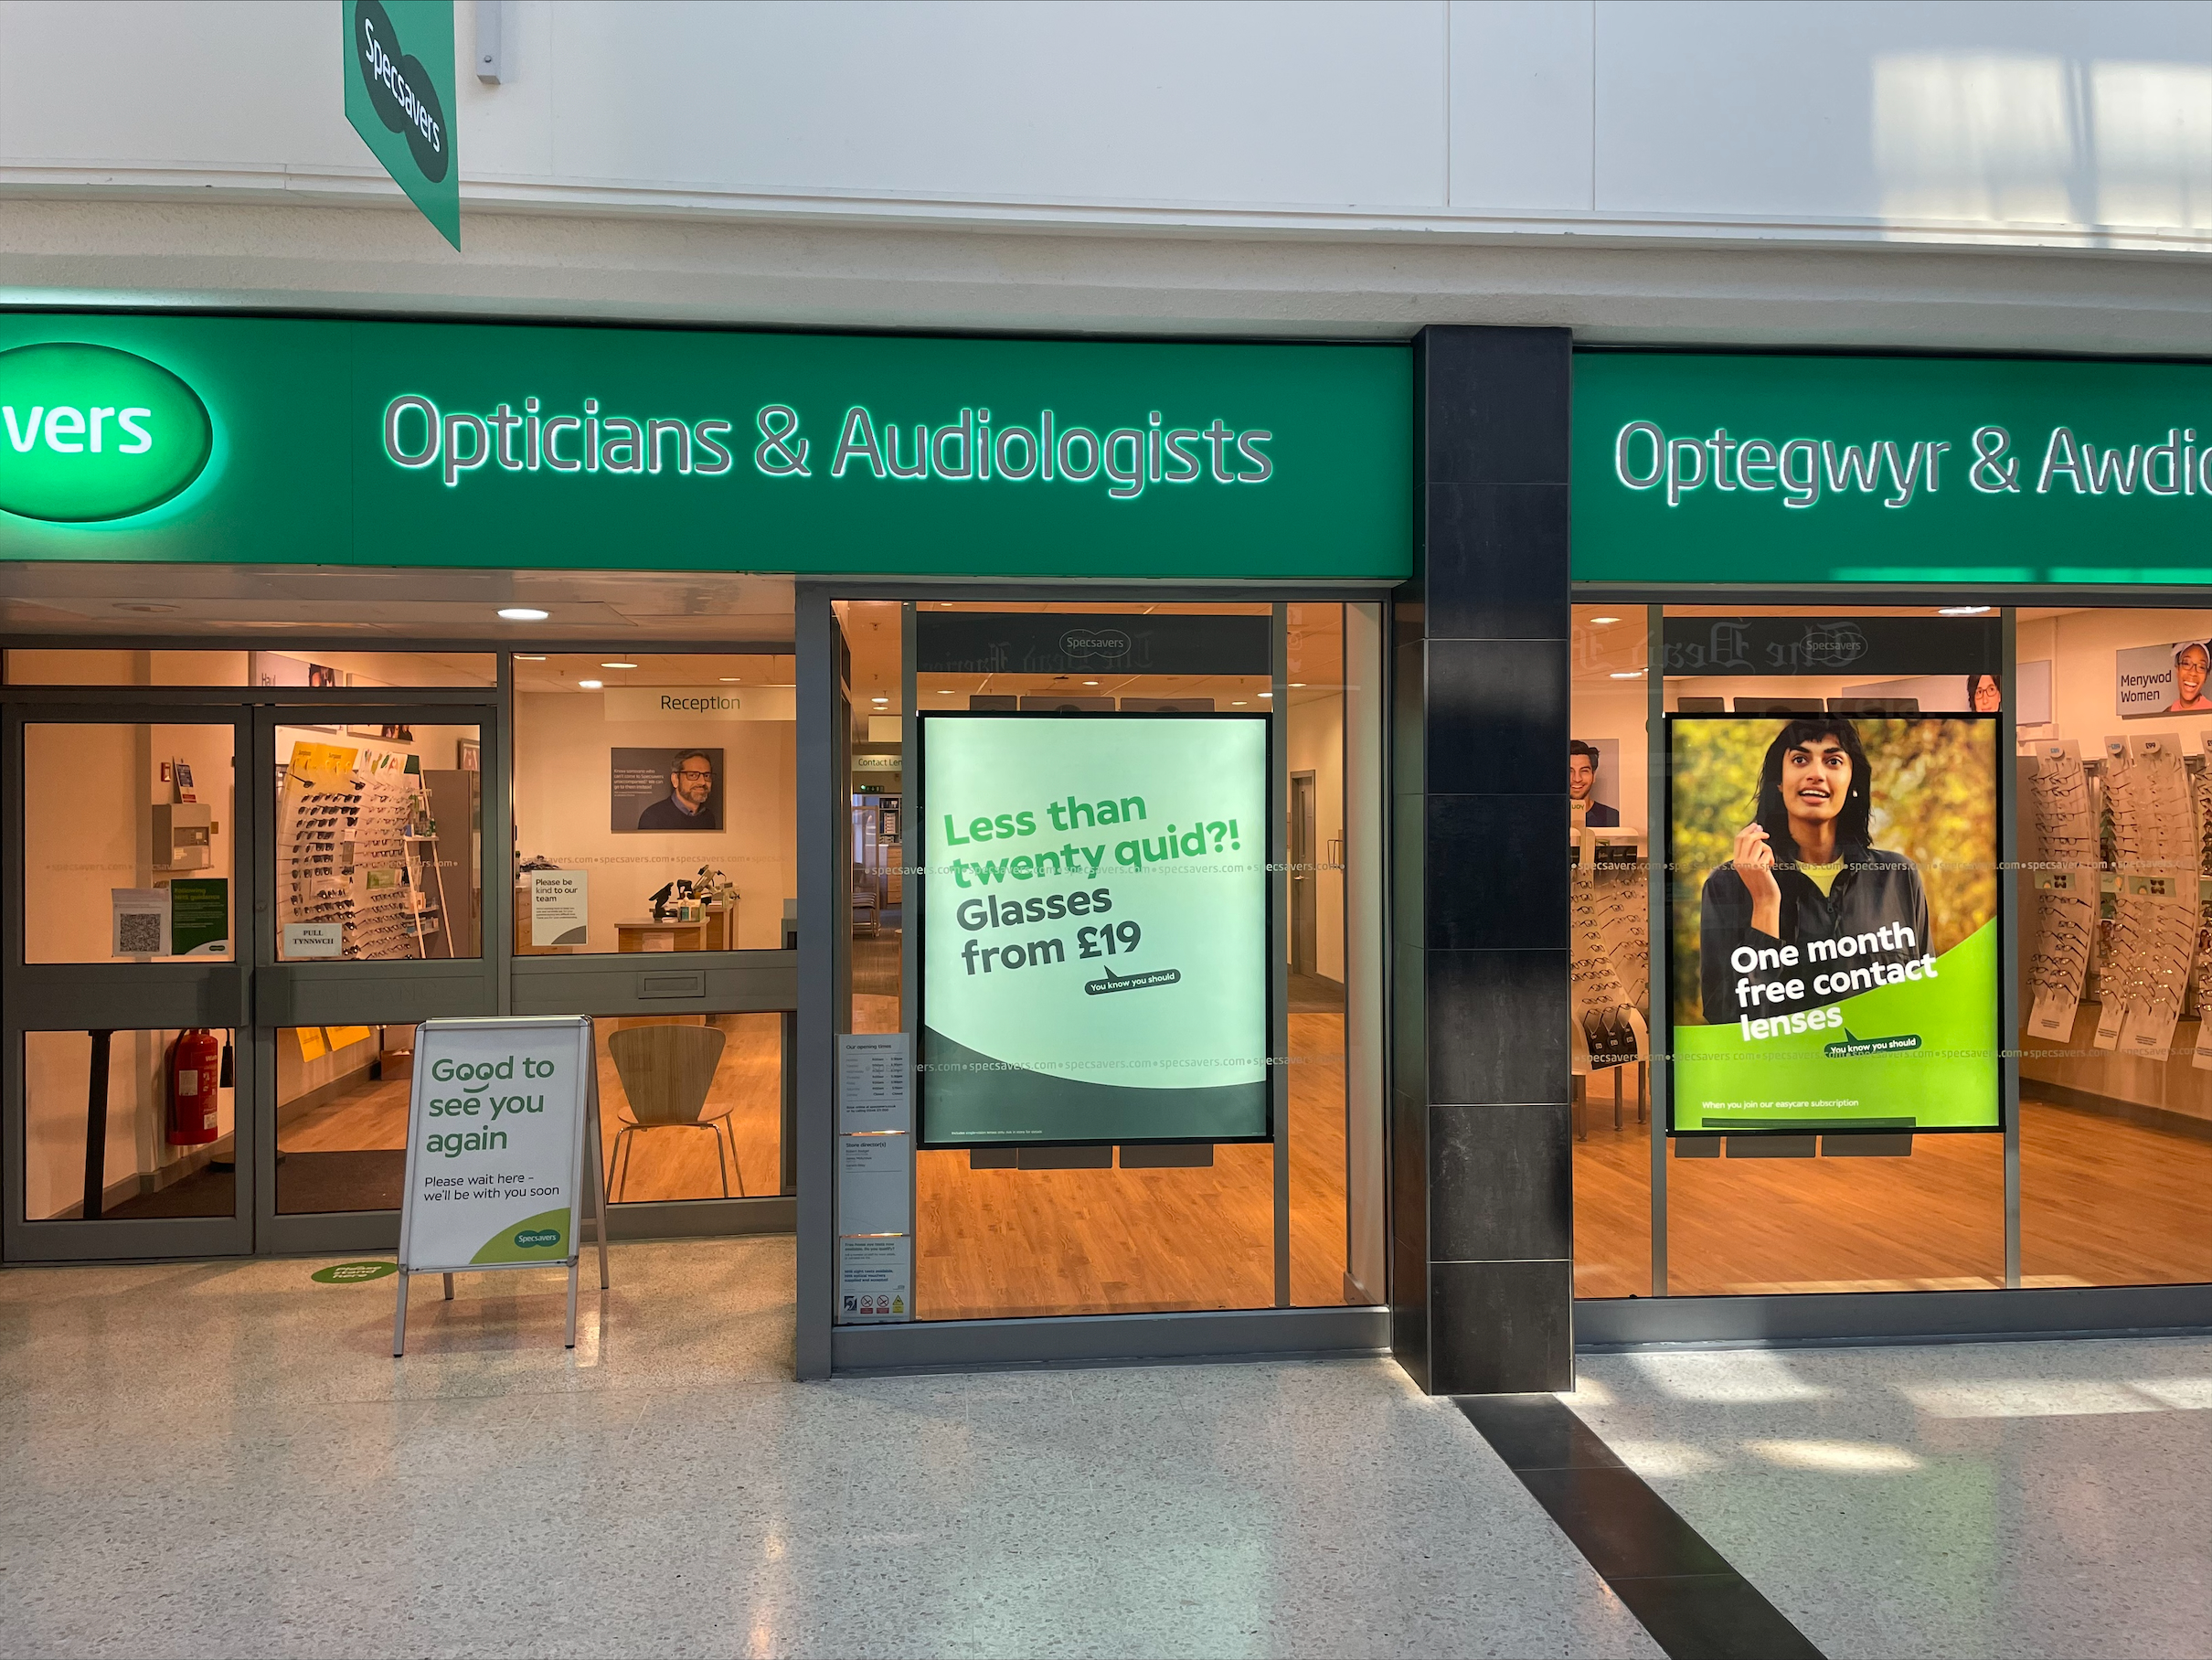 Images Specsavers Opticians and Audiologists - Bangor